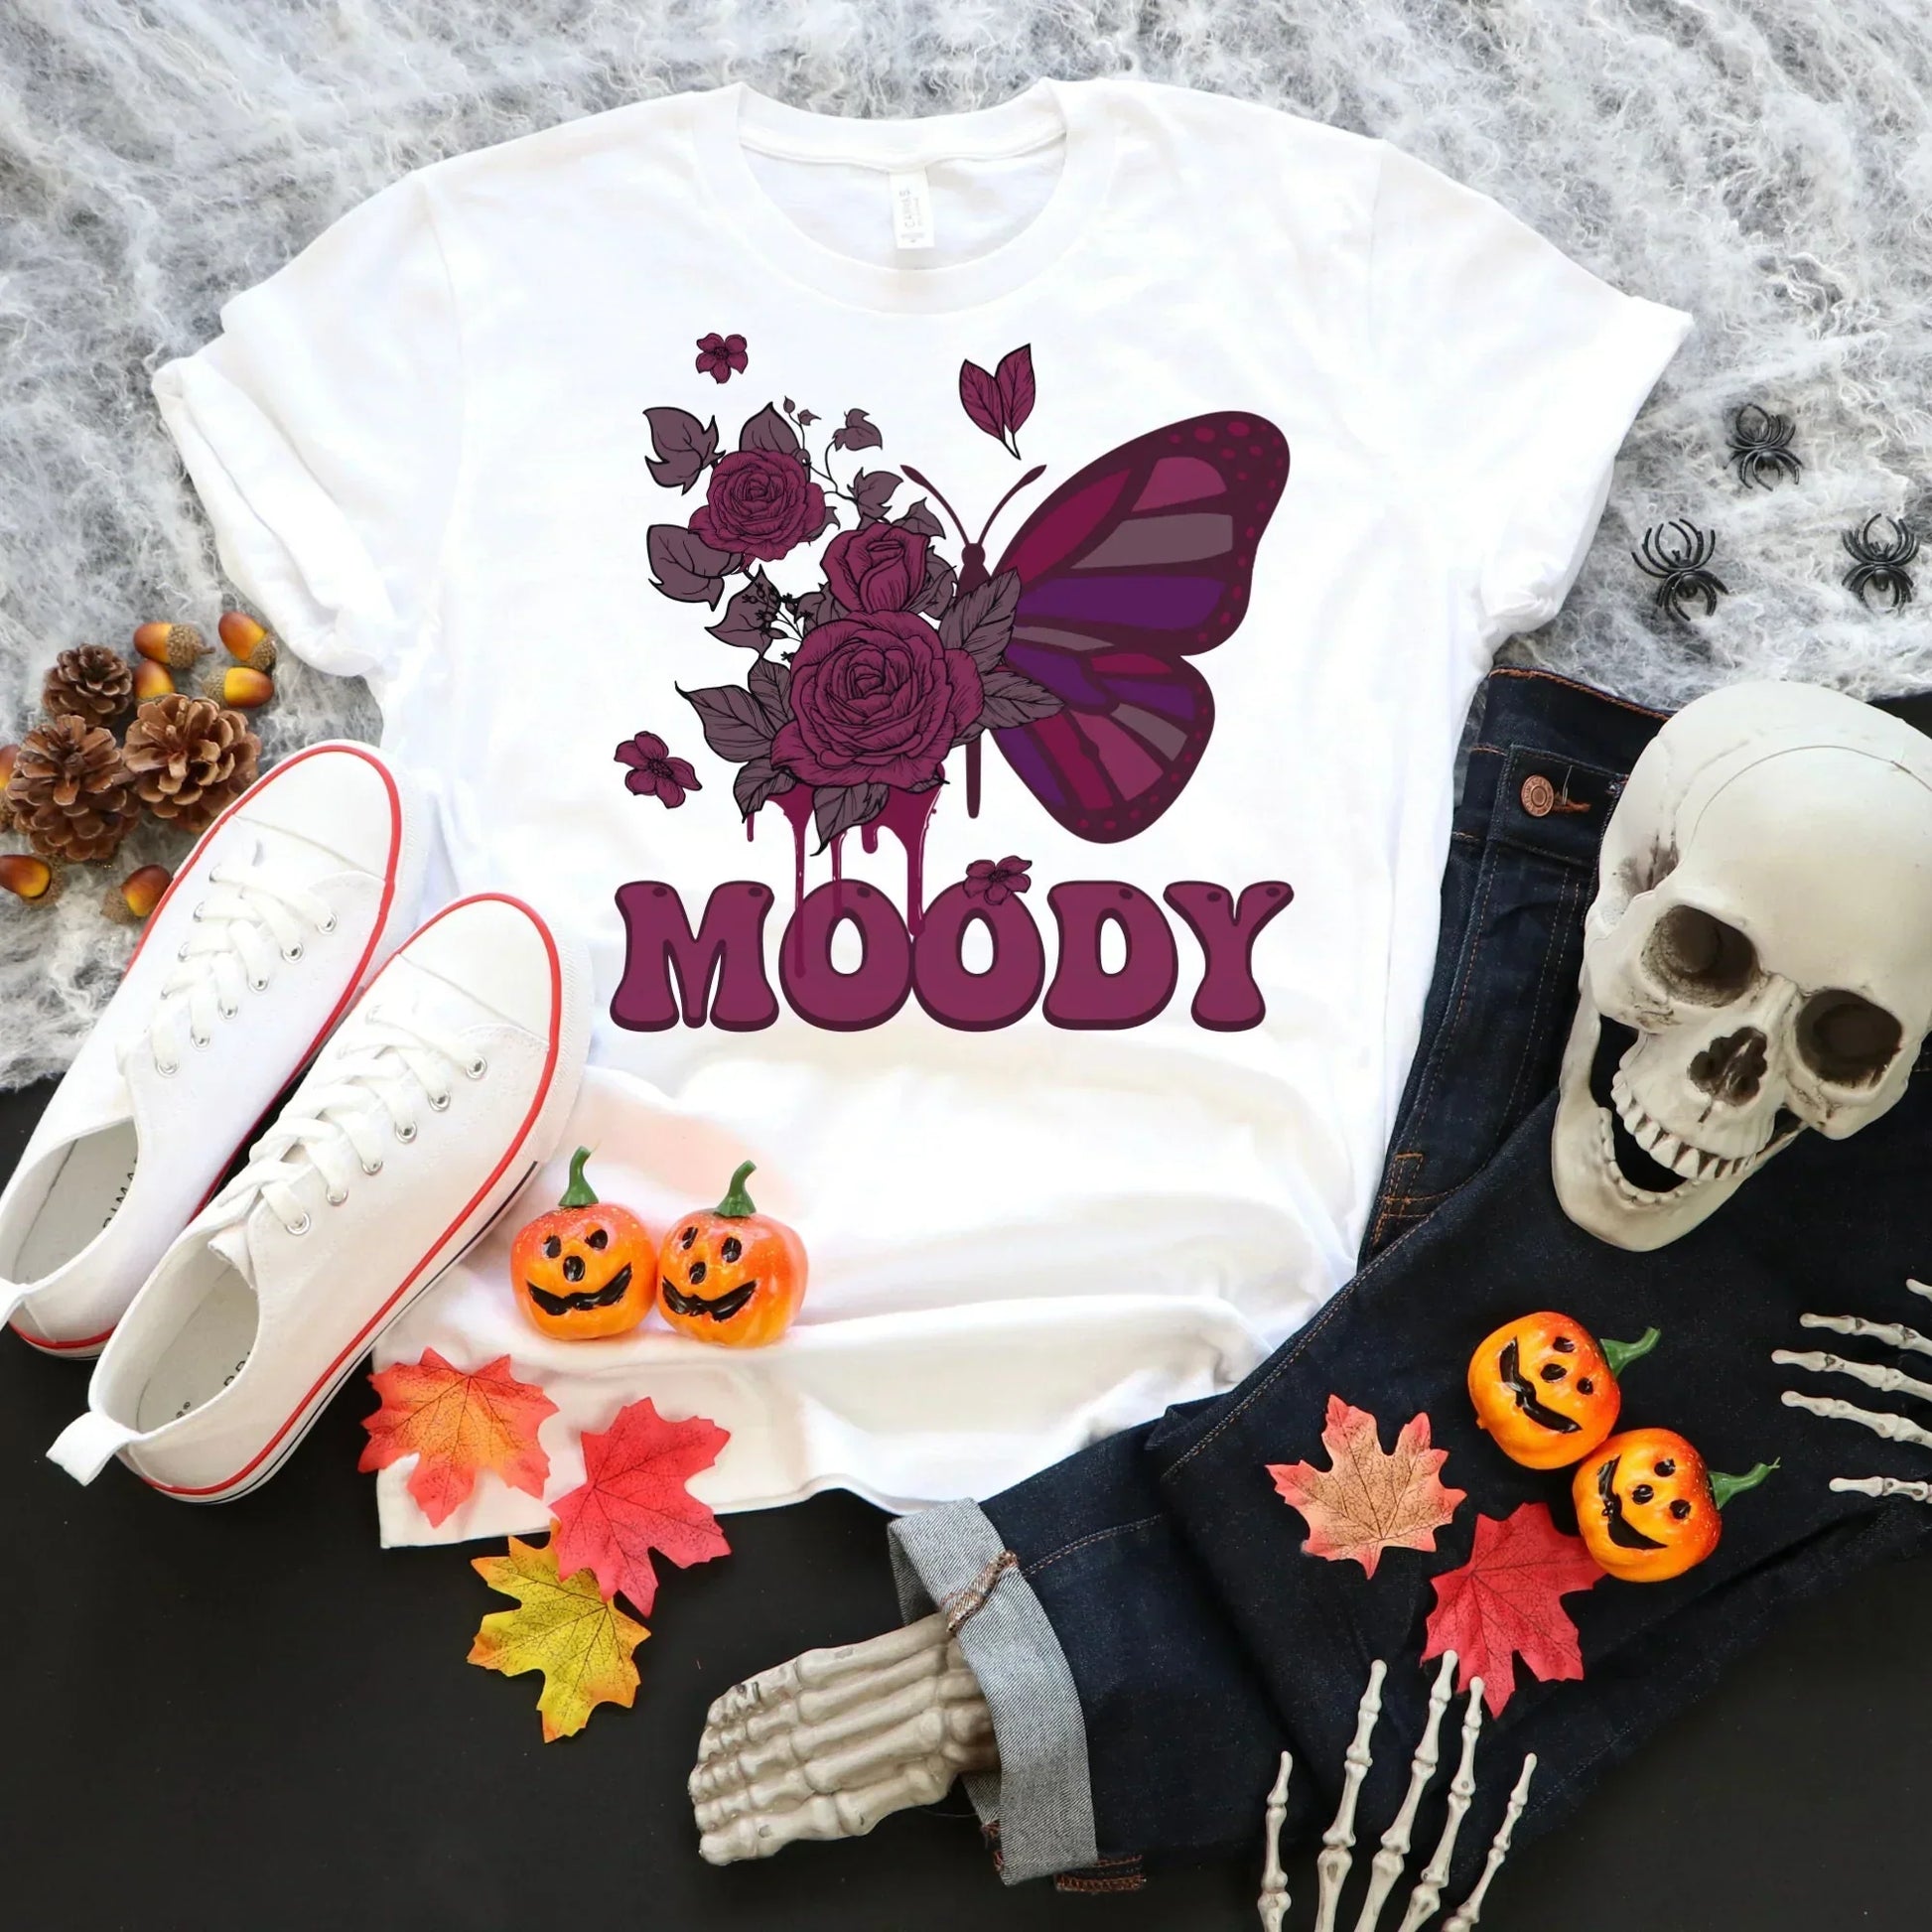 Gothic Shirt, Goth Clothing, Moody Tshirt, Spooky Halloween Sweatshirt, Witchy Vibes, Butterfly Shirt, Moon Shirt, Magical Witch Shirt, EMO HMDesignStudioUS